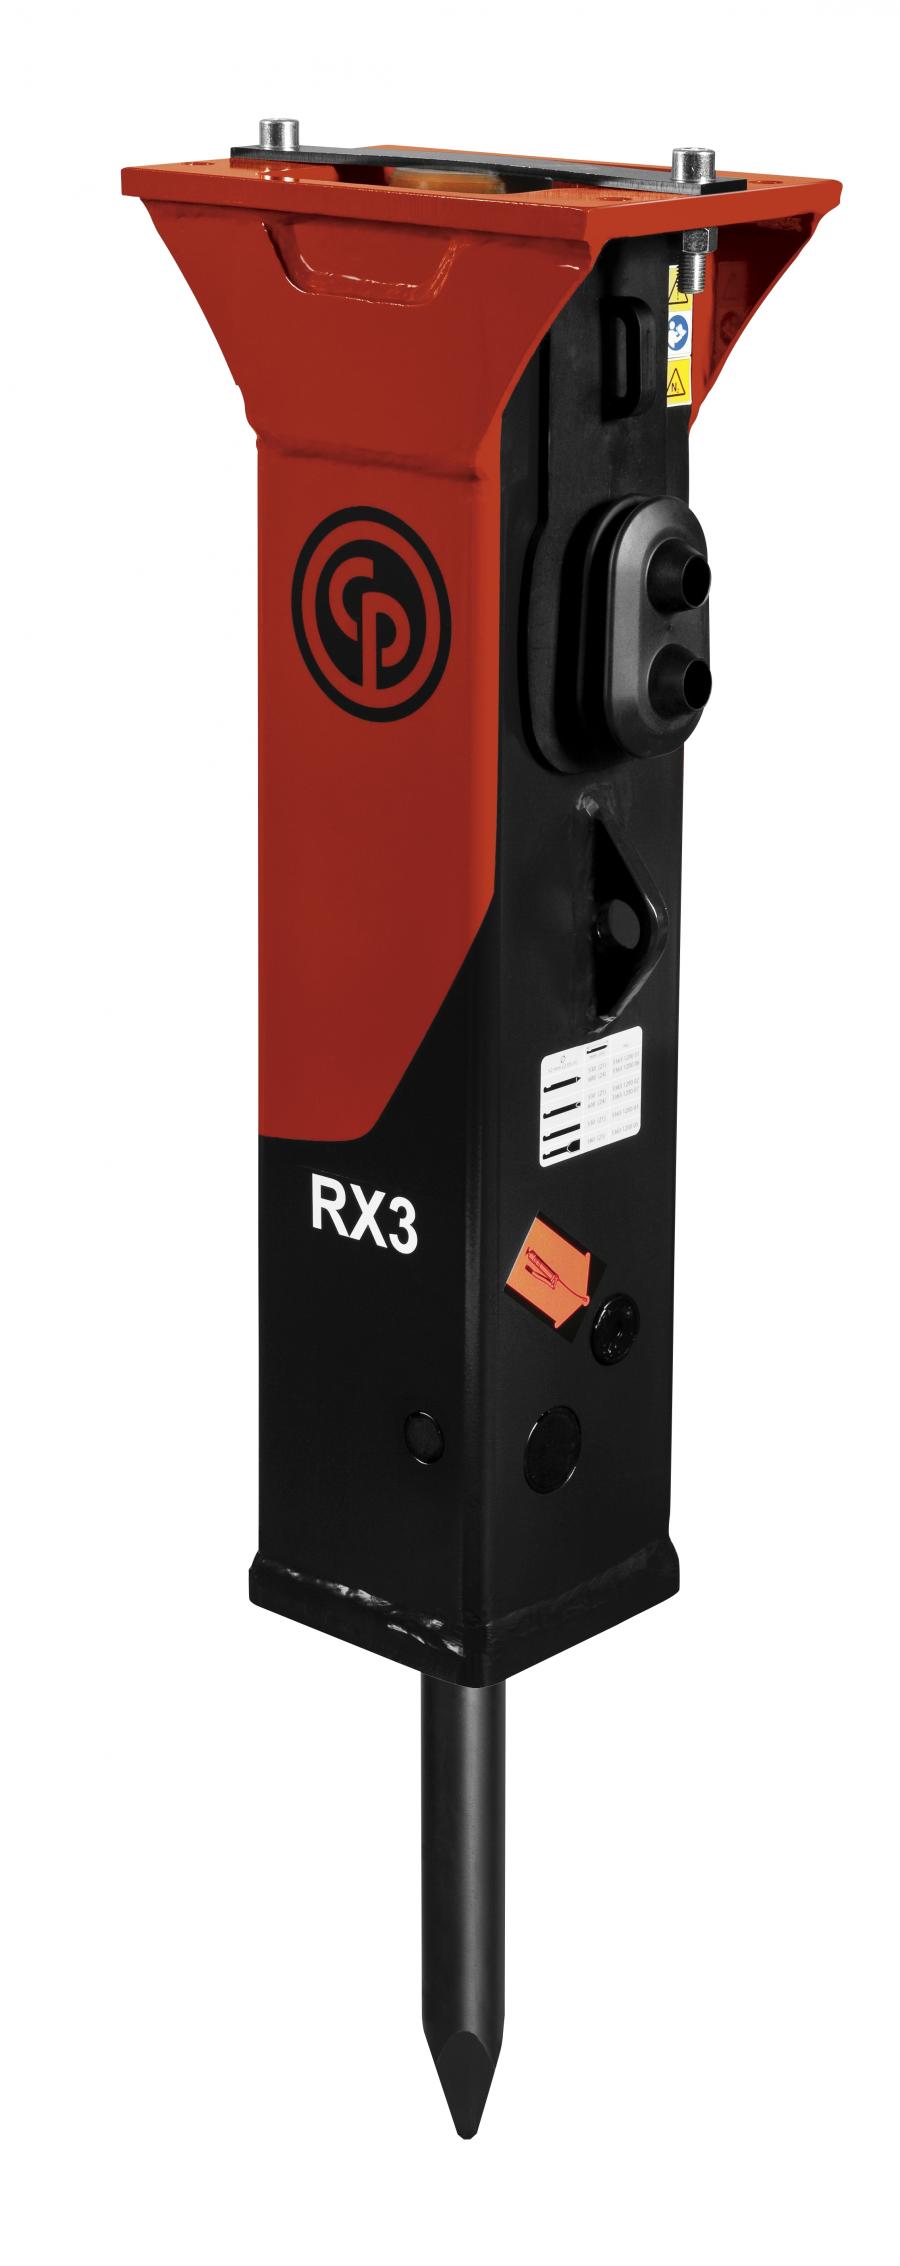 Featuring a service weight of 329 lbs. (166 kg), the RX3 is ideal for a wide range of applications. The breaker is specified for carriers with a capacity of 4,600 to 9,900 lbs. (Carrier Class 2.1 to 4.5 t).